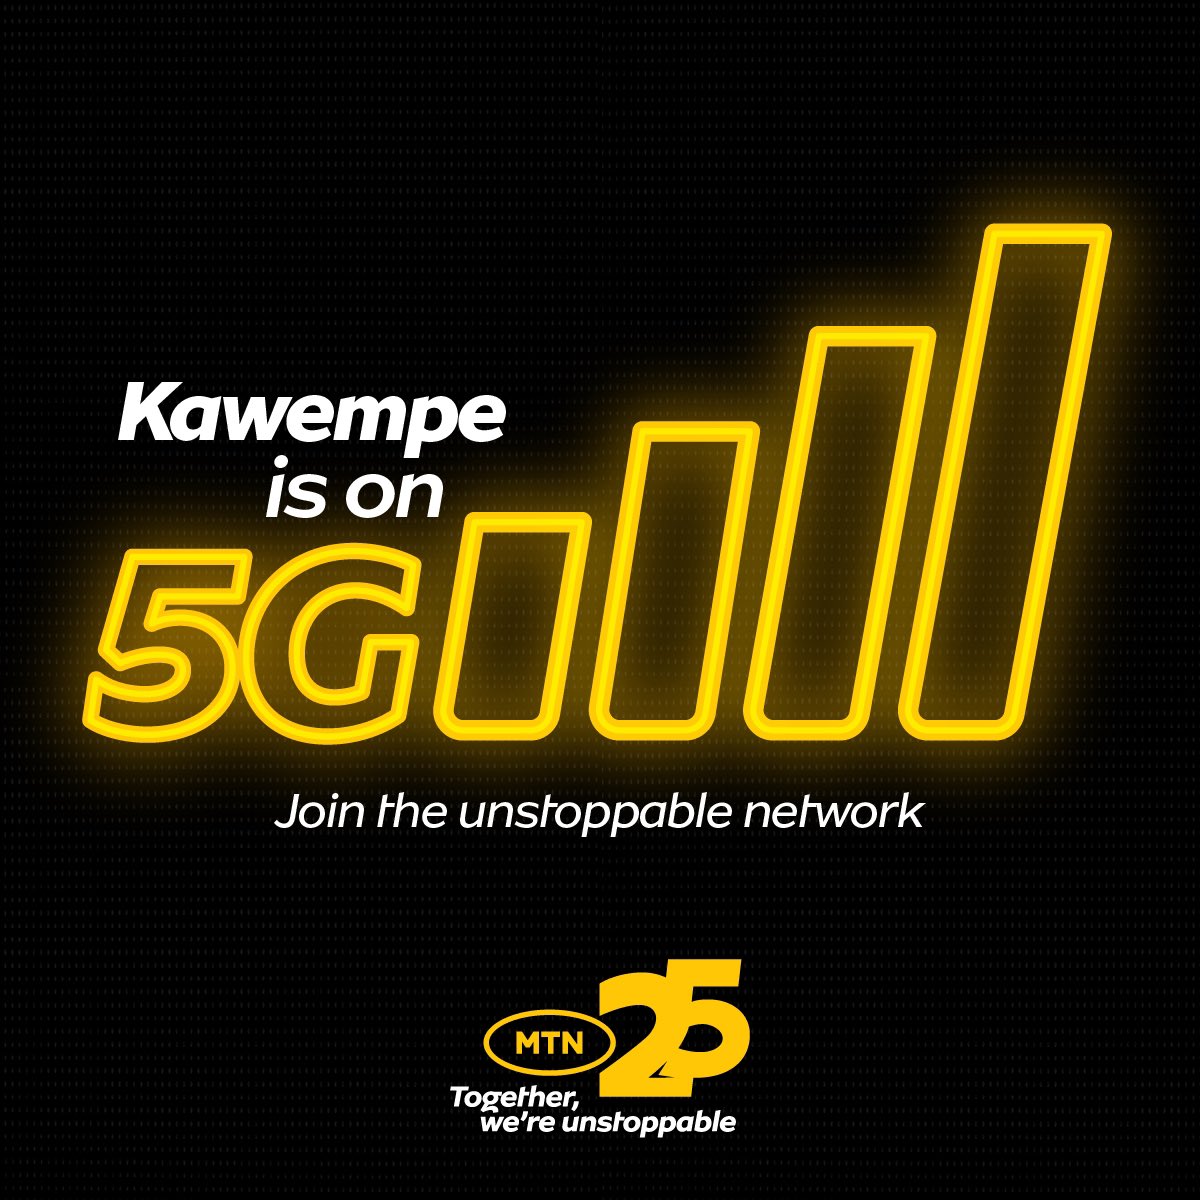 The #UnstoppableNetwork just can’t stop providing fast network. Join #MTN5G and enjoy
#TogetherWereUnstoppable